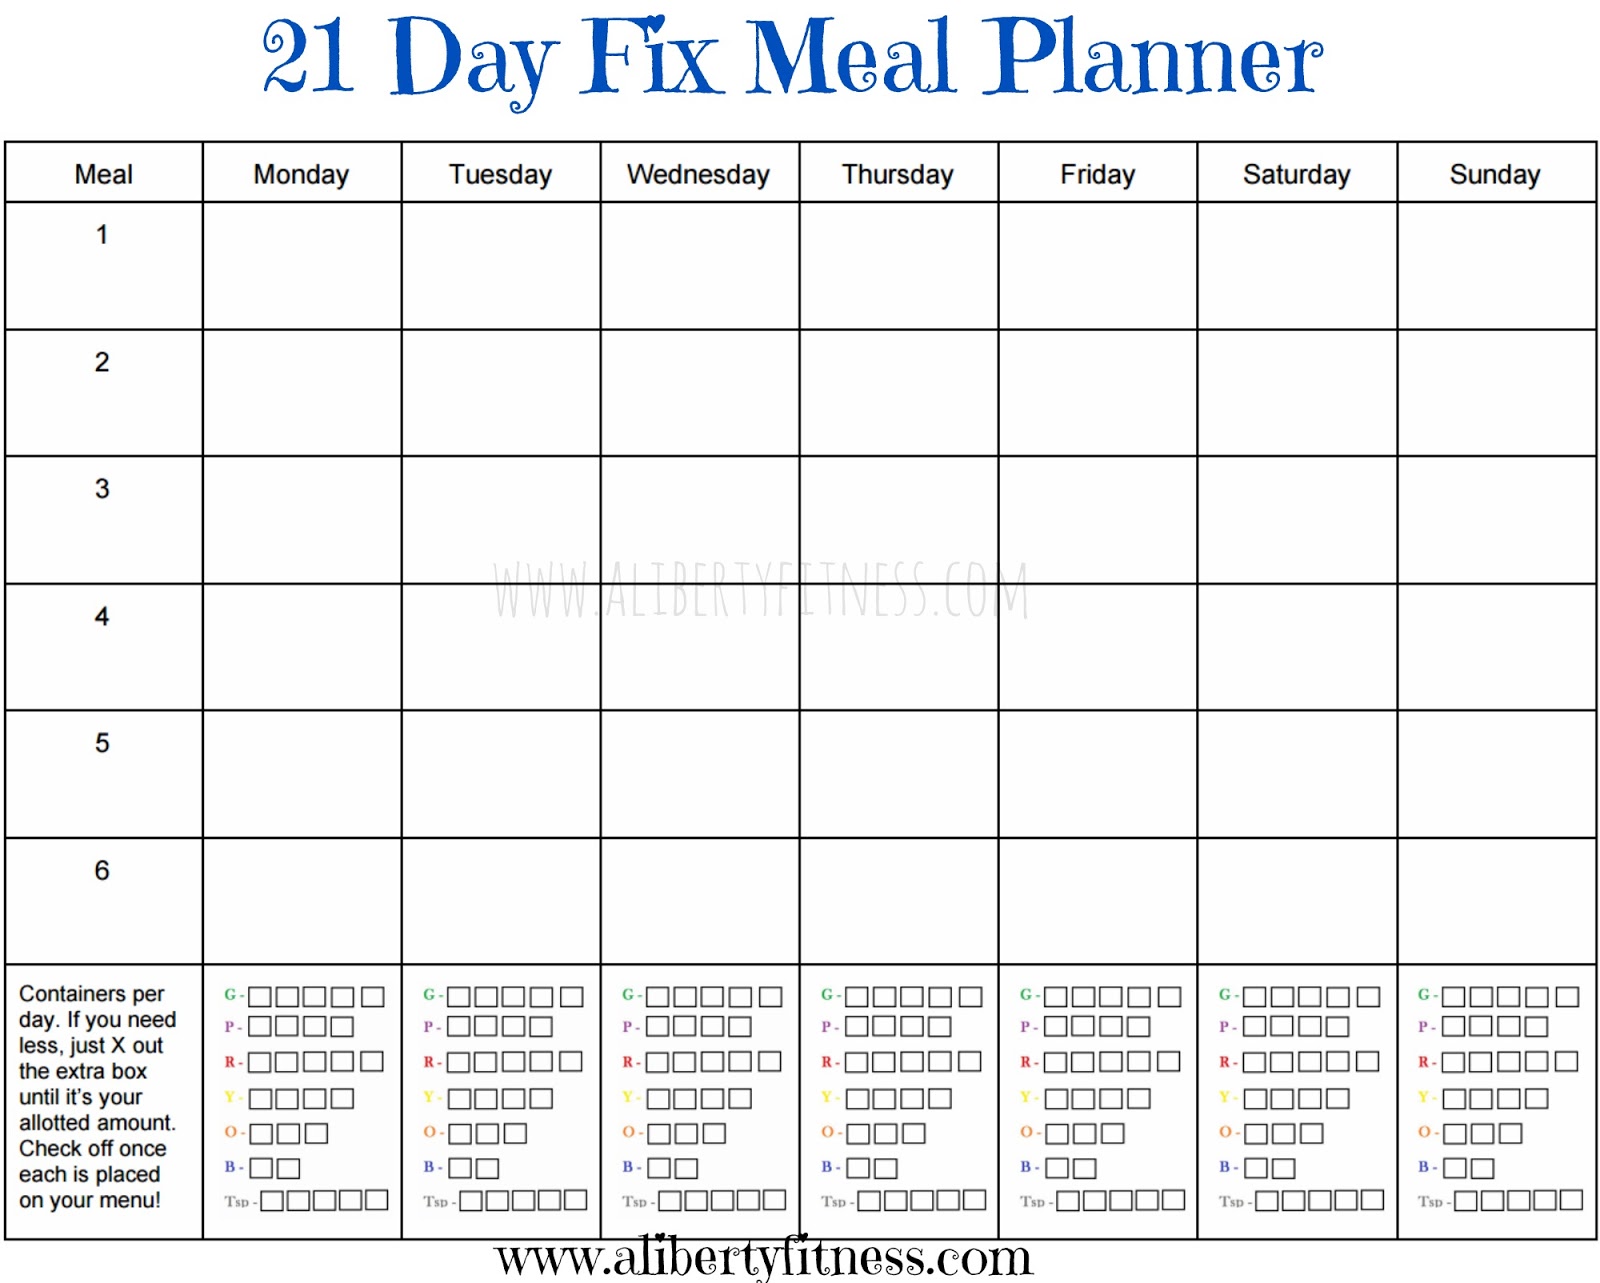 grace-grit-21-day-fix-meal-planner-and-grocery-list